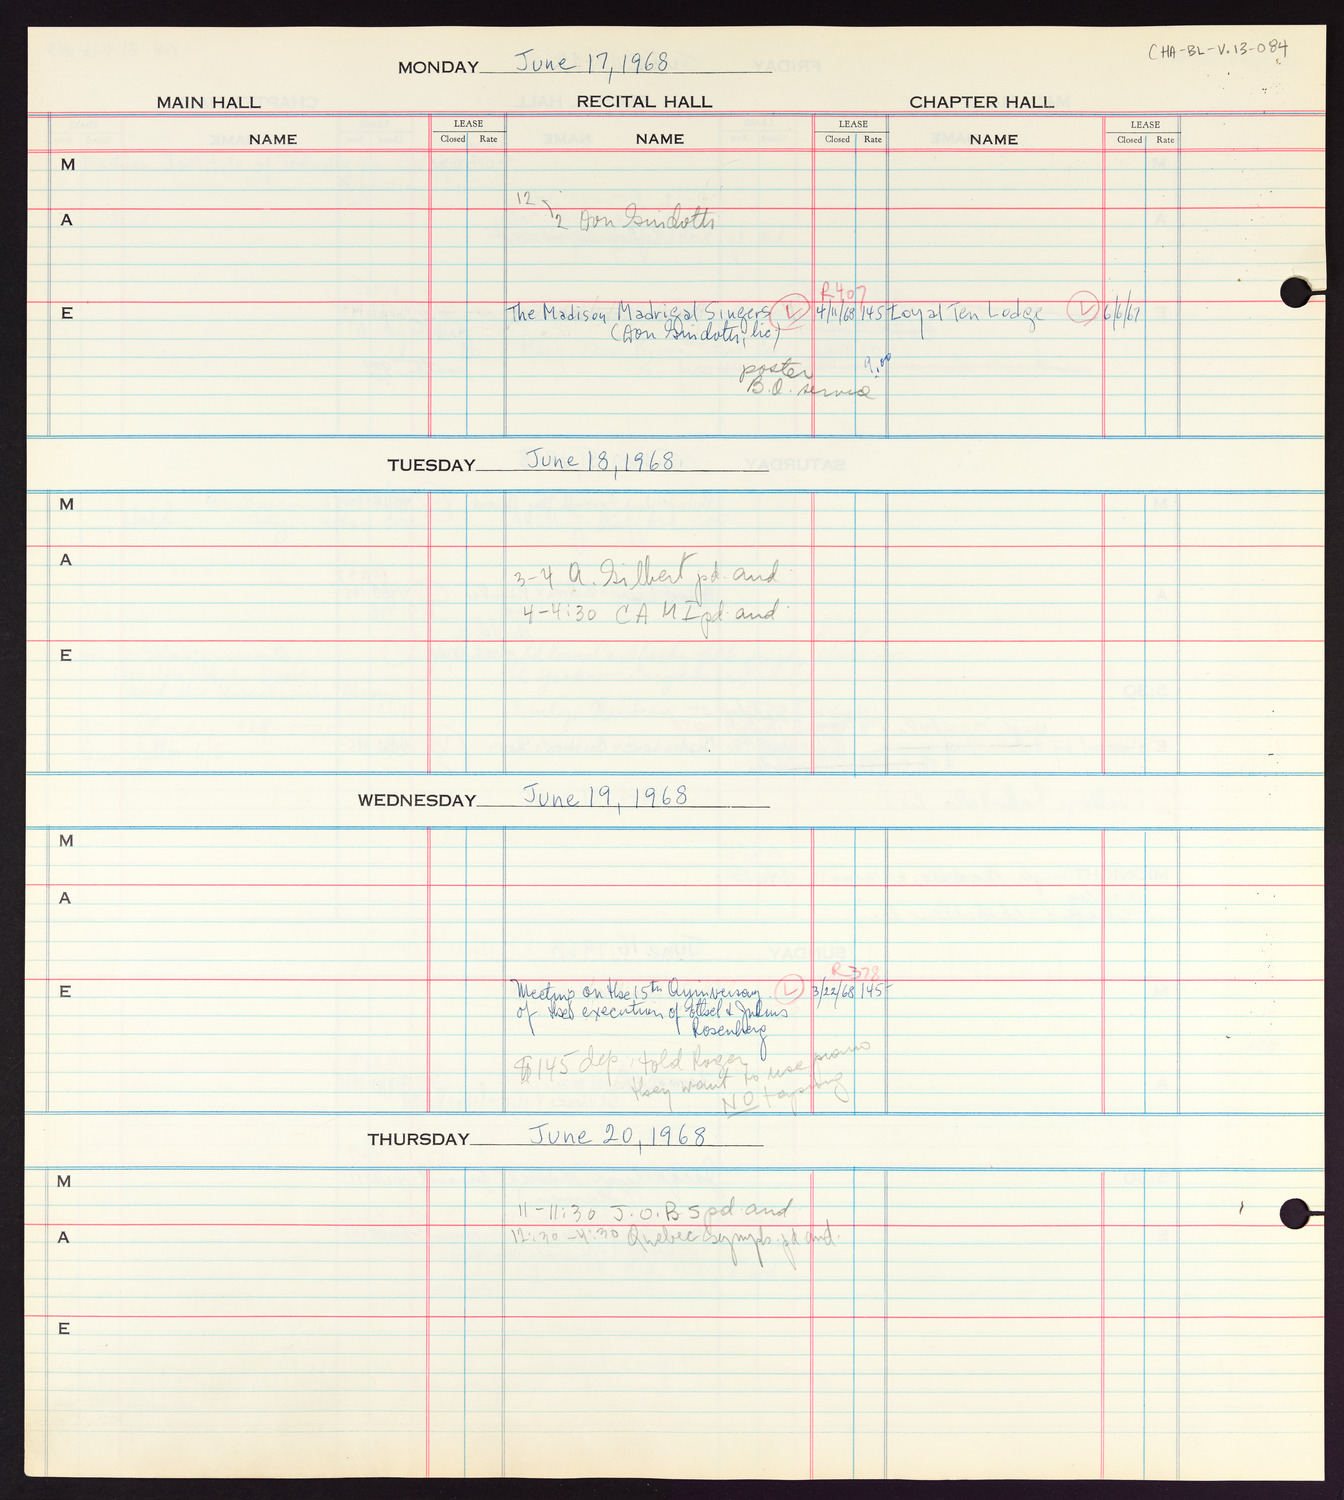 Carnegie Hall Booking Ledger, volume 13, page 84